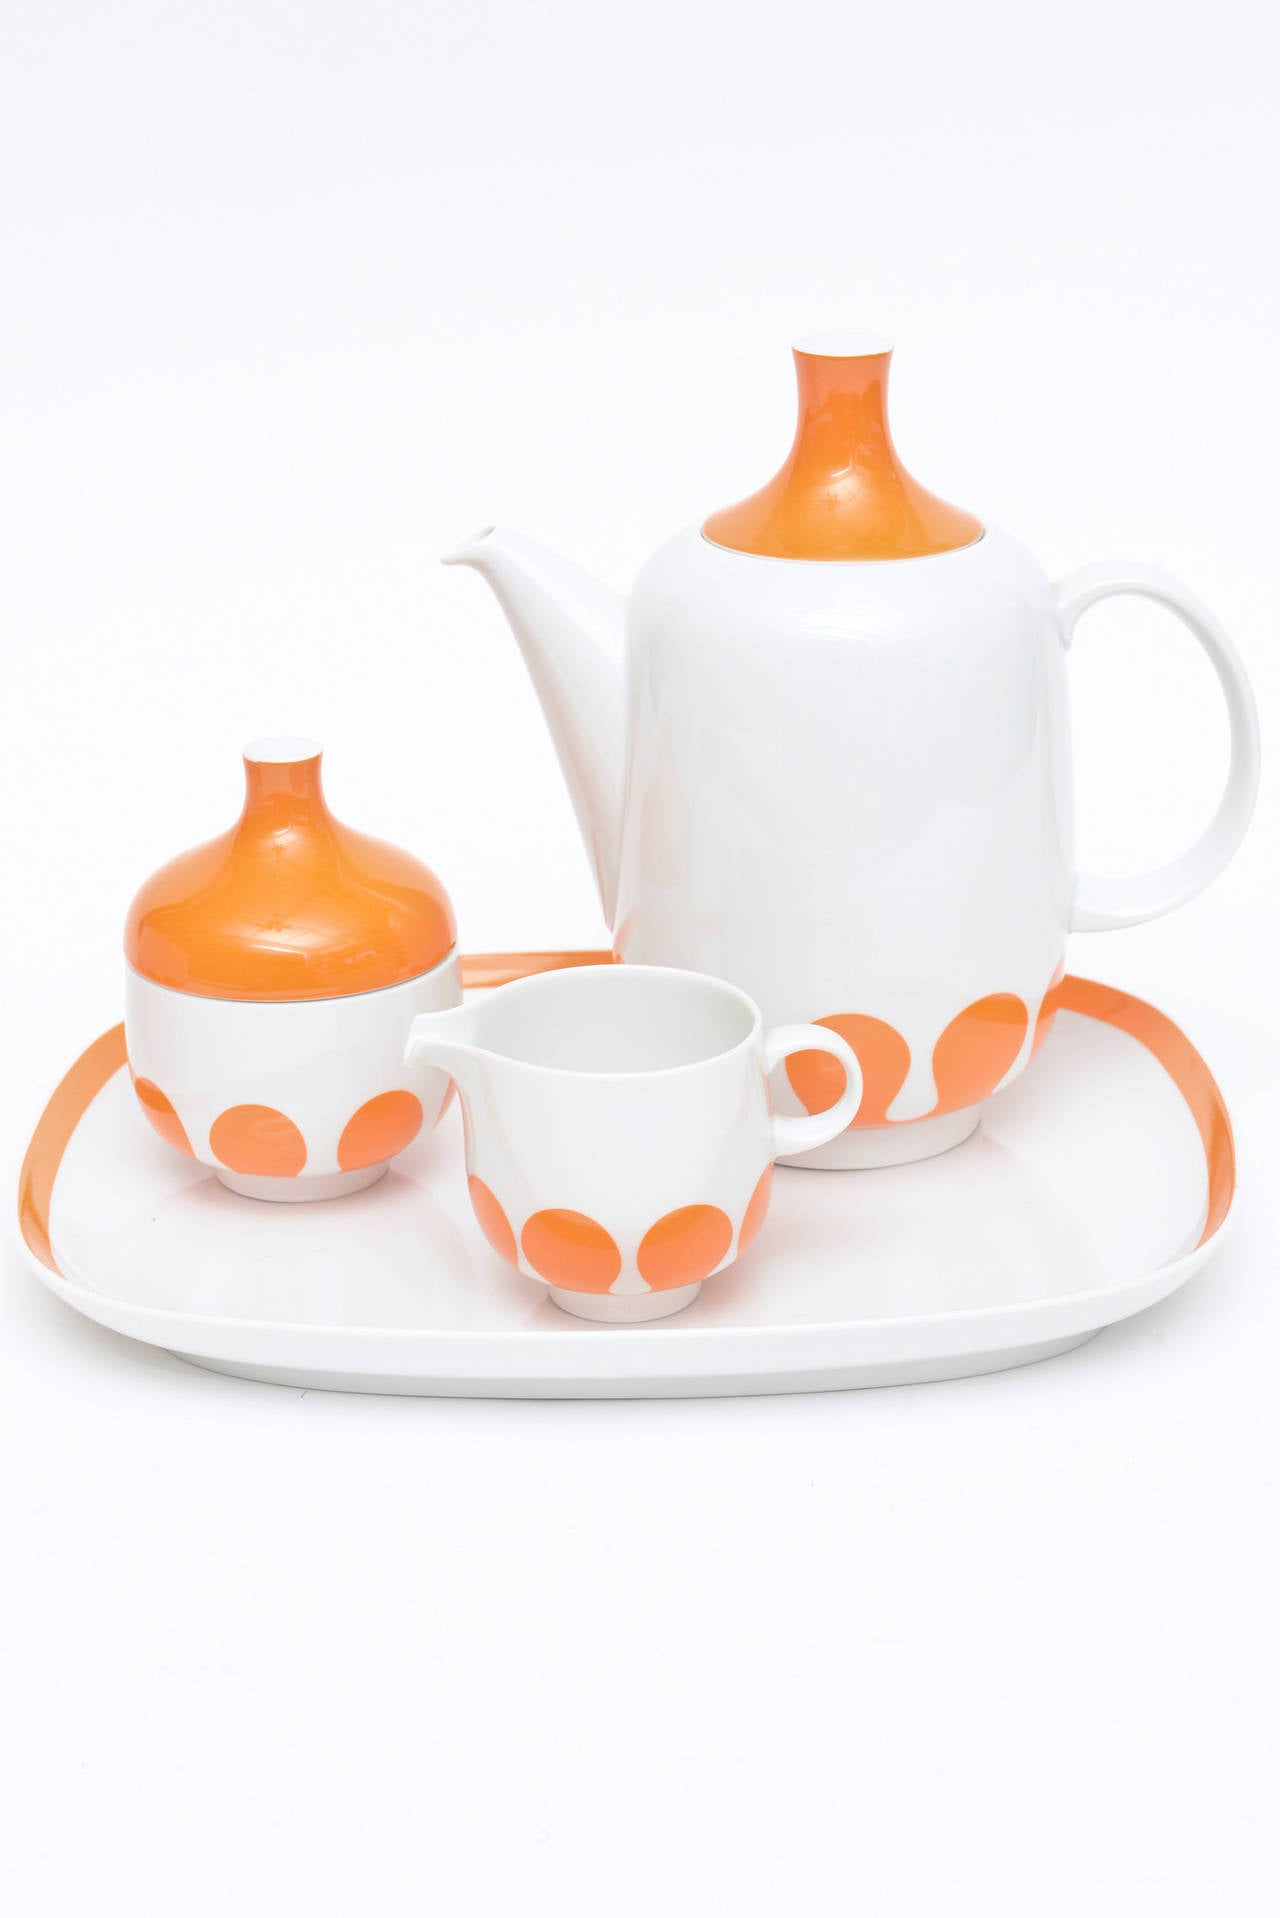 The pop of orange and white in this early 1960s very mod five-piece Rosenthal china service consists of a big serving bowl, a tray, coffee or tea, creamer and sugar.
The orange exaggerated teardrop bubble designs that surrounds the base of each